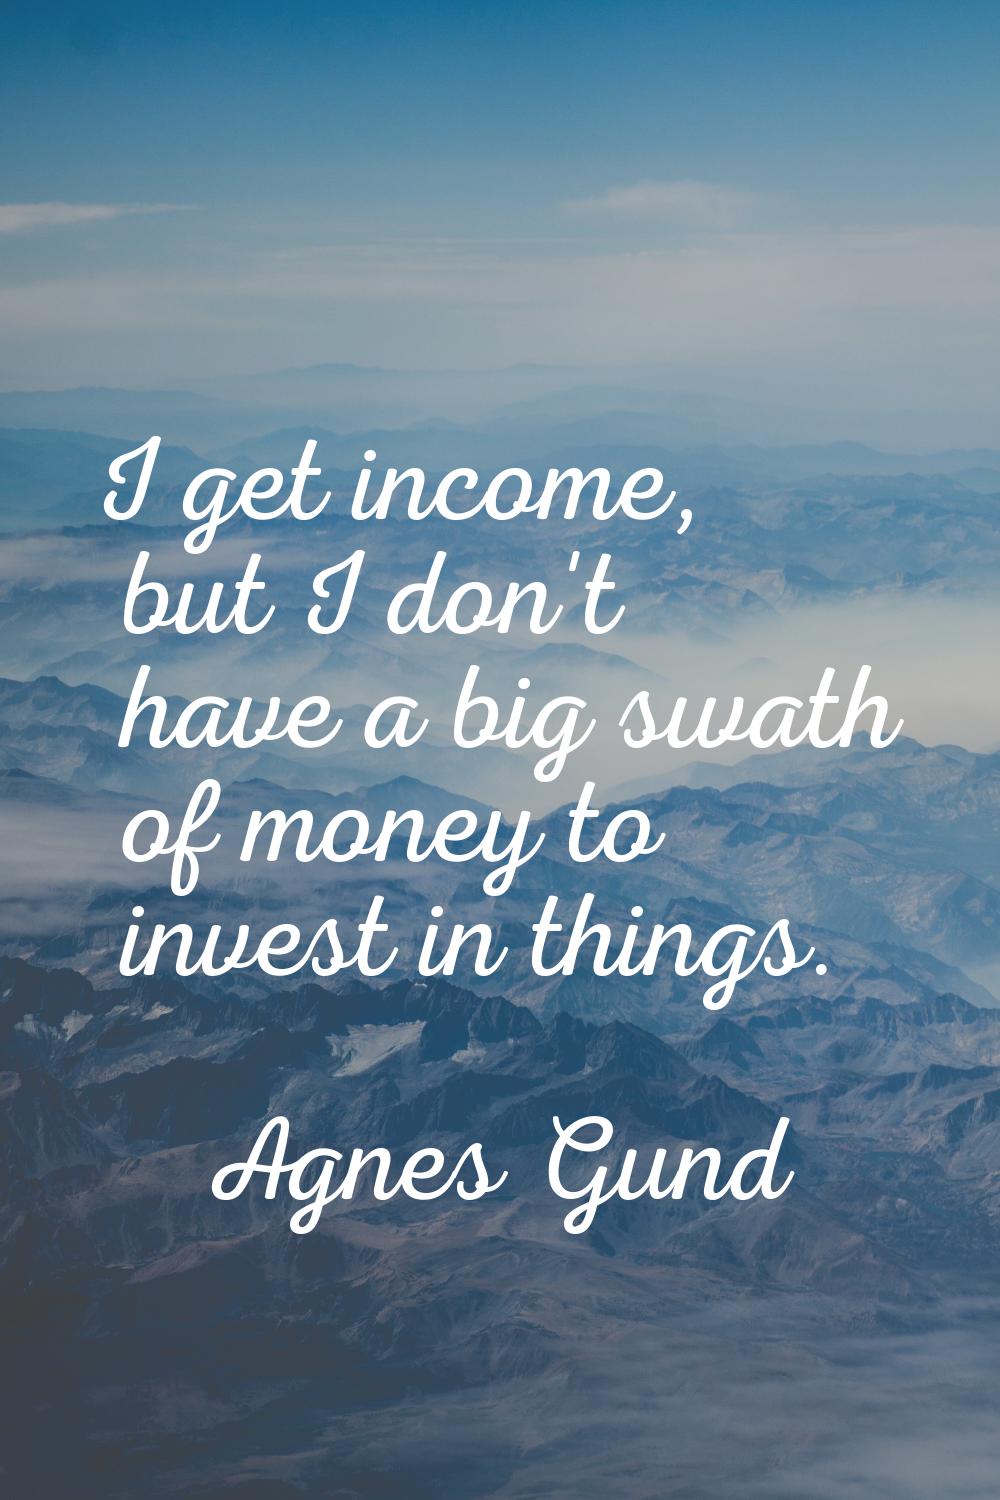 I get income, but I don't have a big swath of money to invest in things.